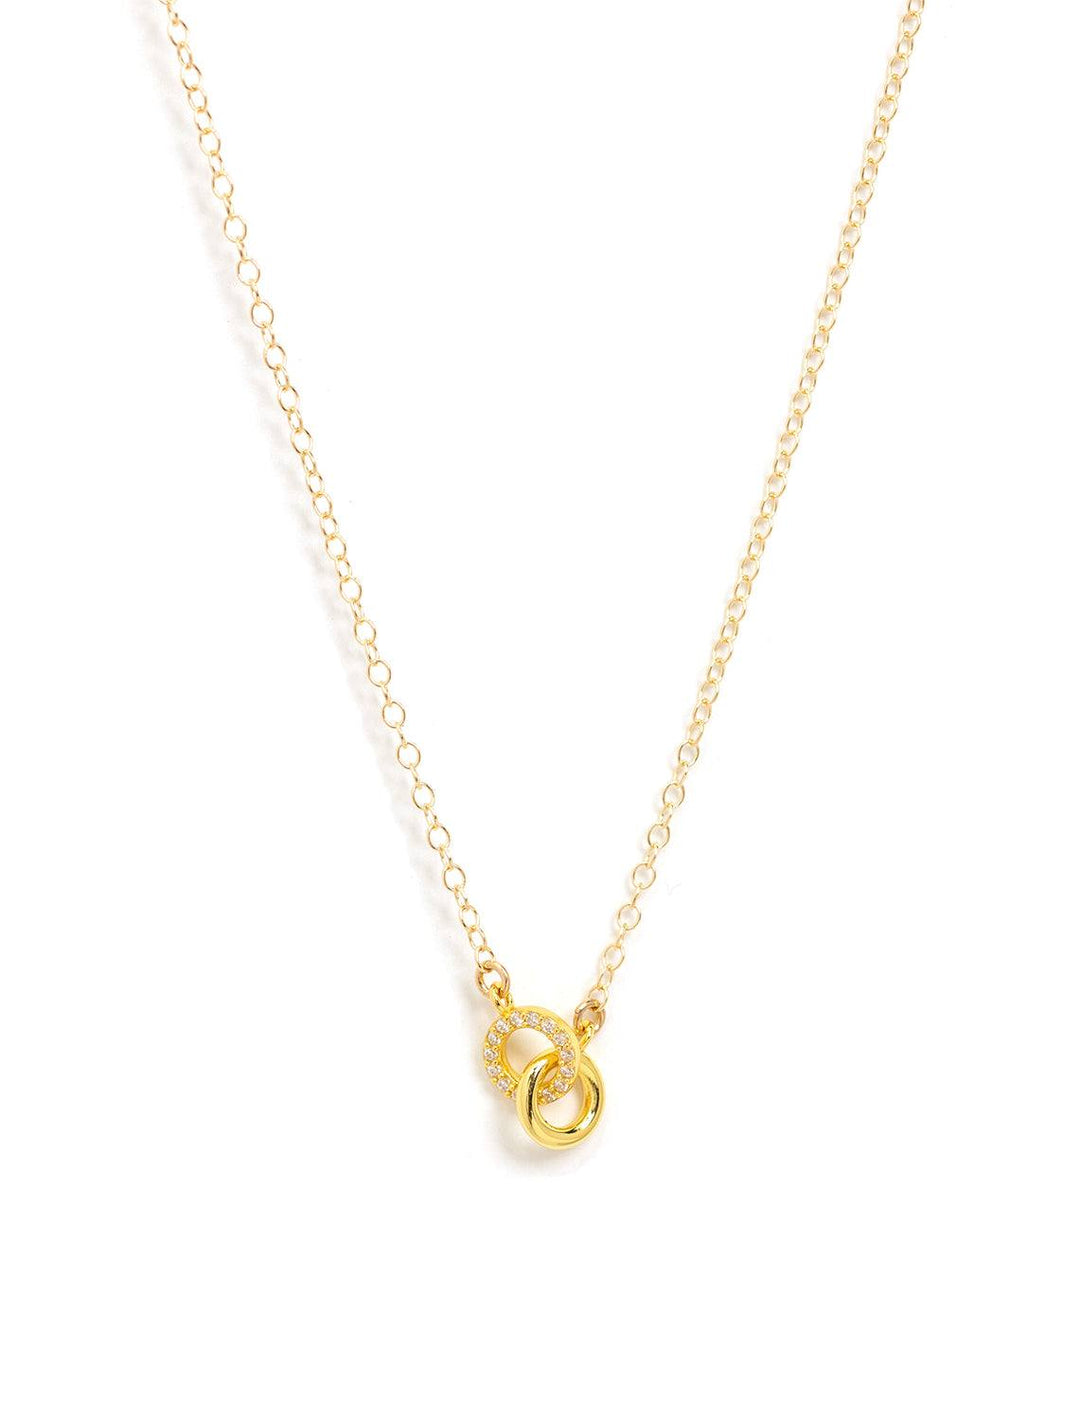 Kris Nations' double link crystal charm necklace in gold.